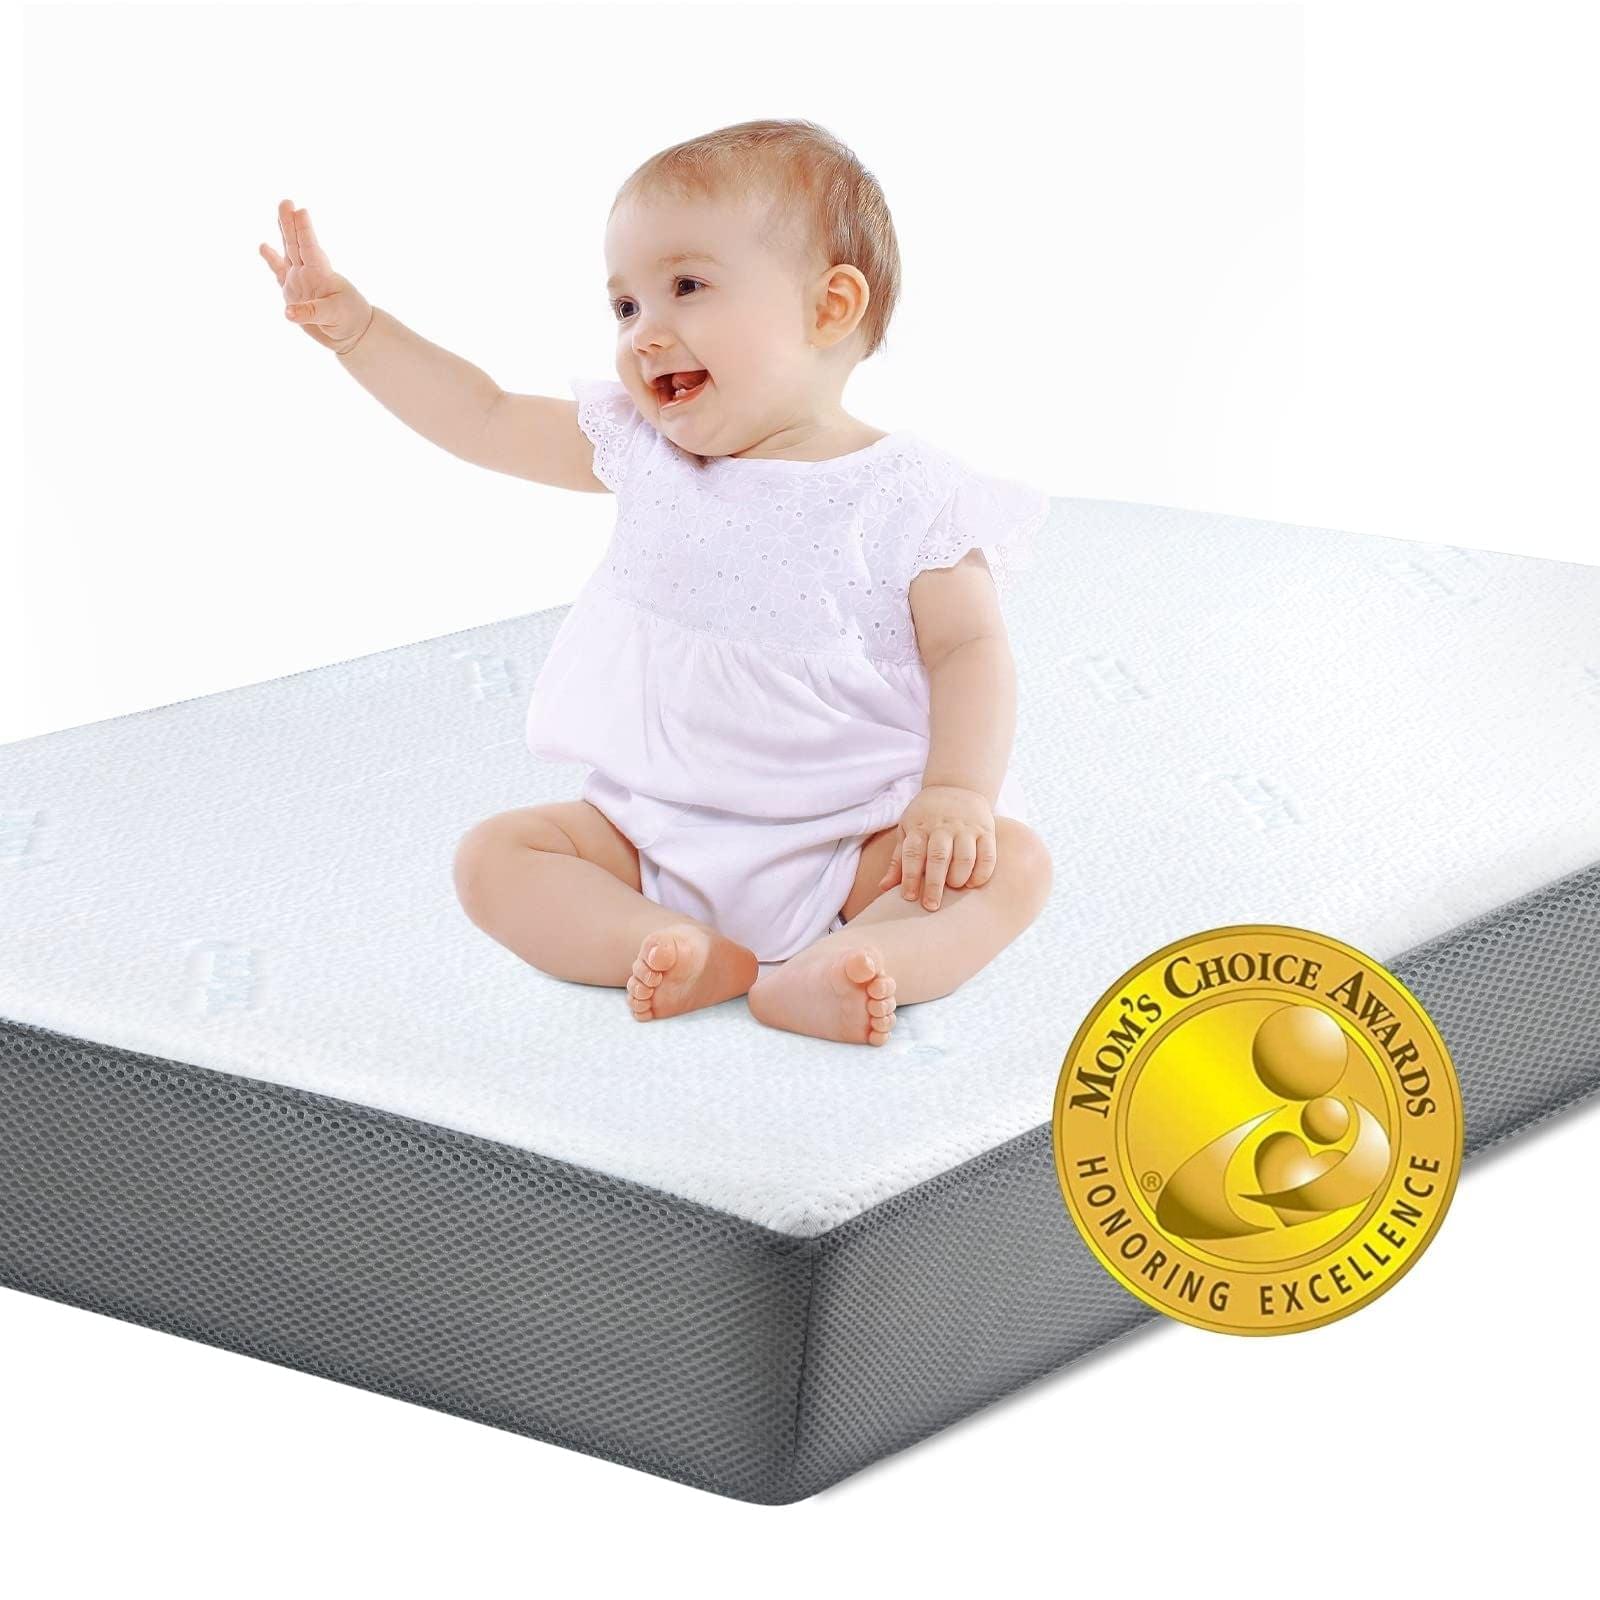 Sleepah Bed Rail for Toddlers Memory Foam Bed Bumper Guard w Dual Non